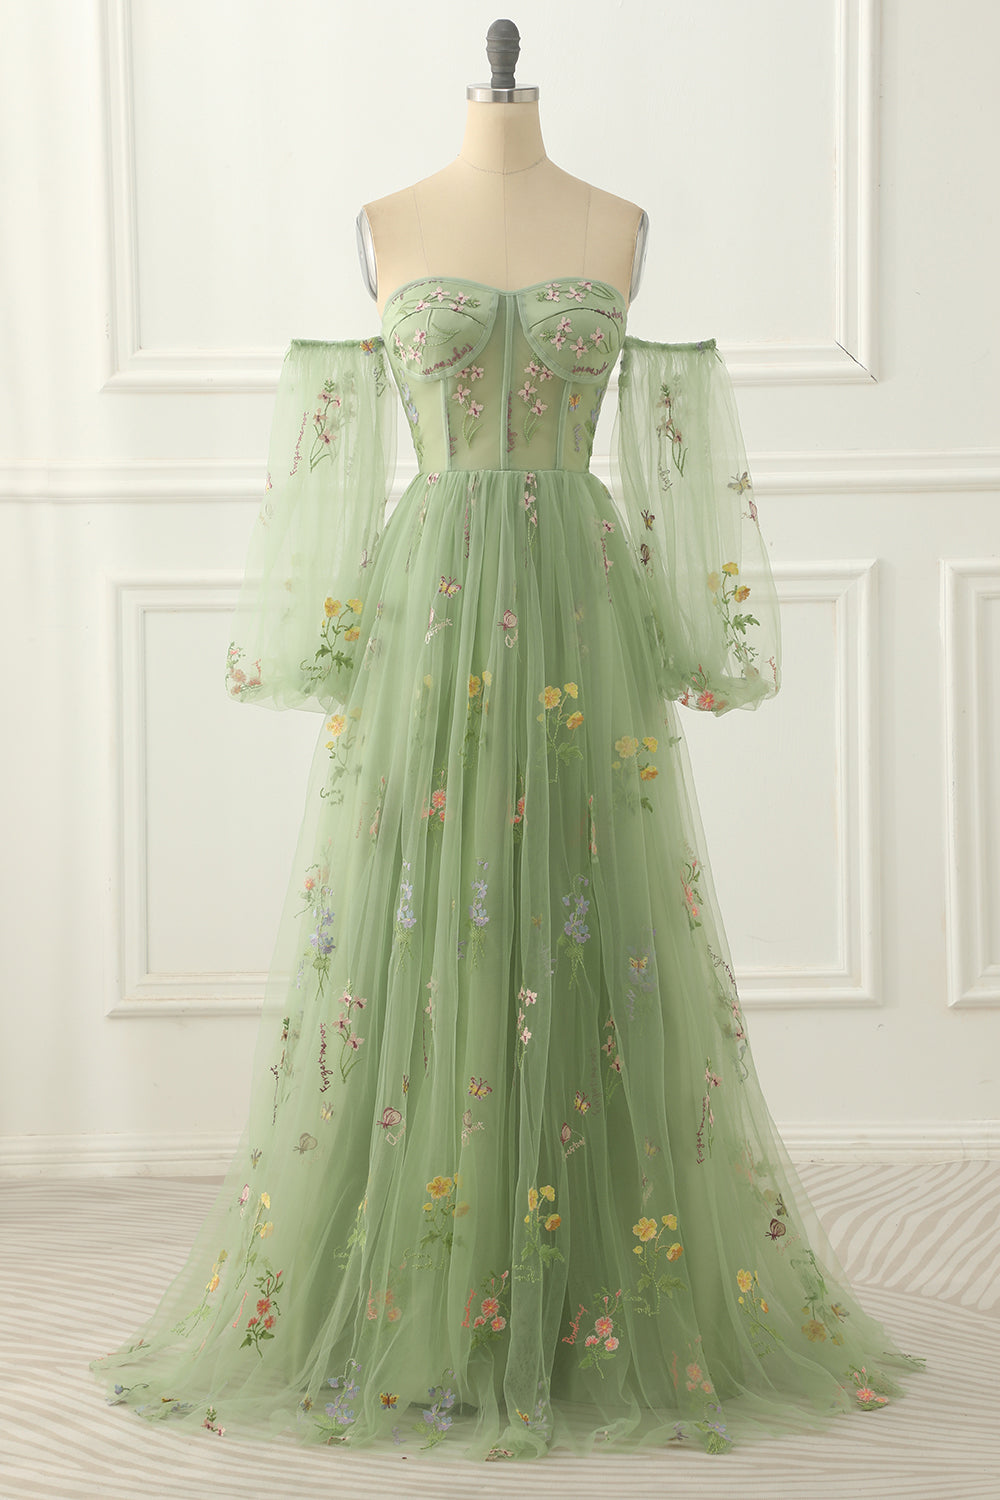 Green Tulle Off The Shoulder A Line Prom Dress With Floral Embroidery